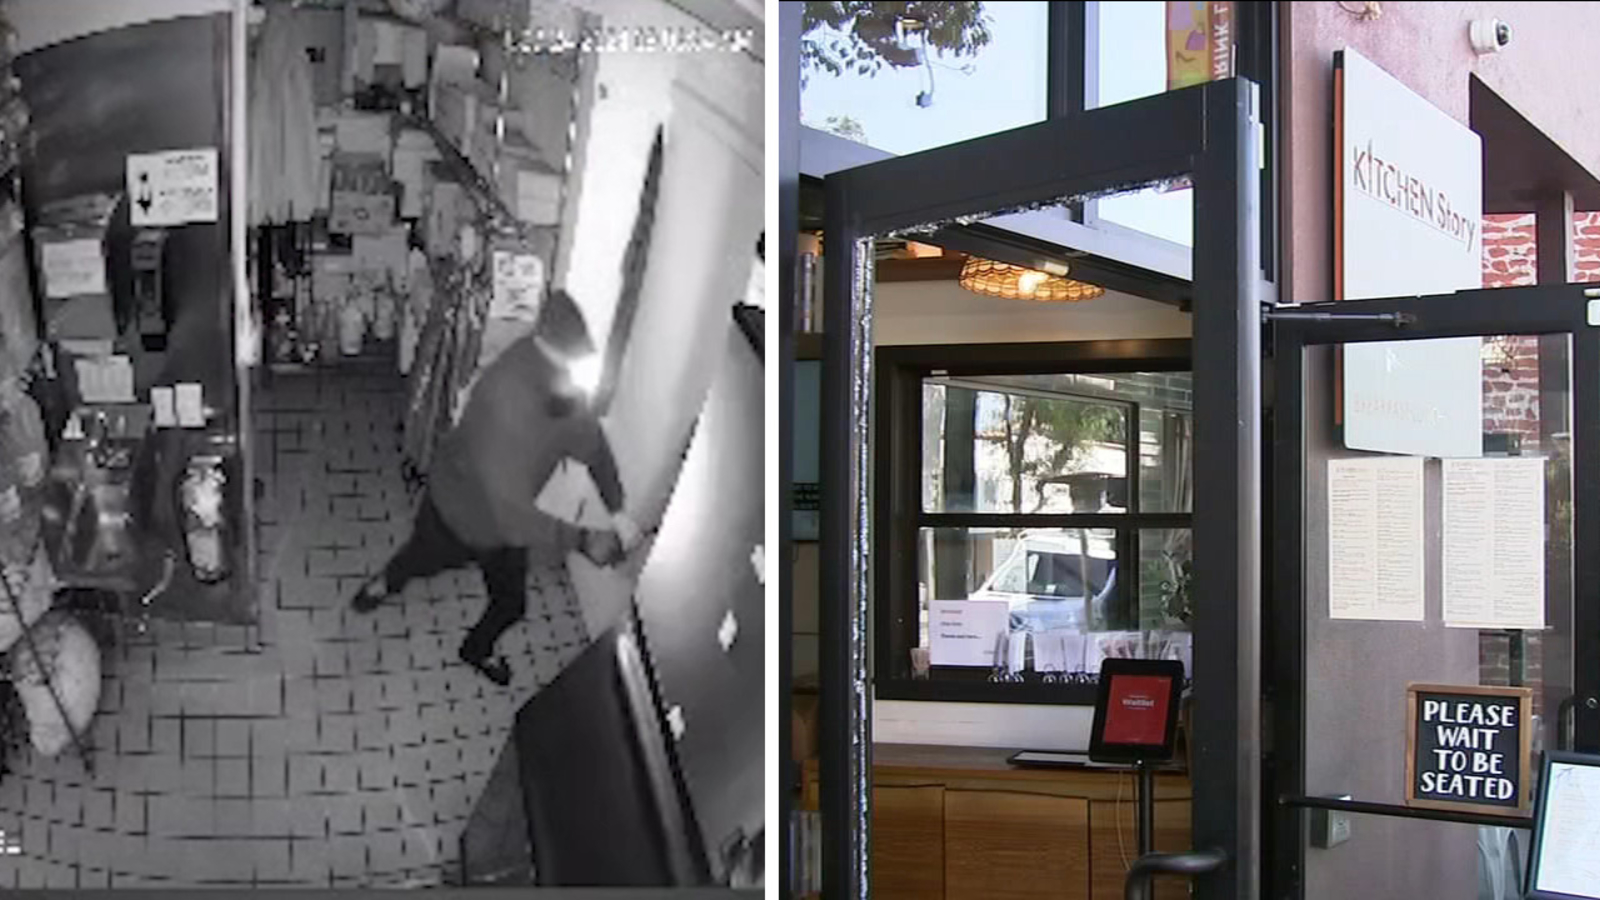 Video shows Oakland’s Kitchen Story restaurant burglarized for seventh time in four years [Video]